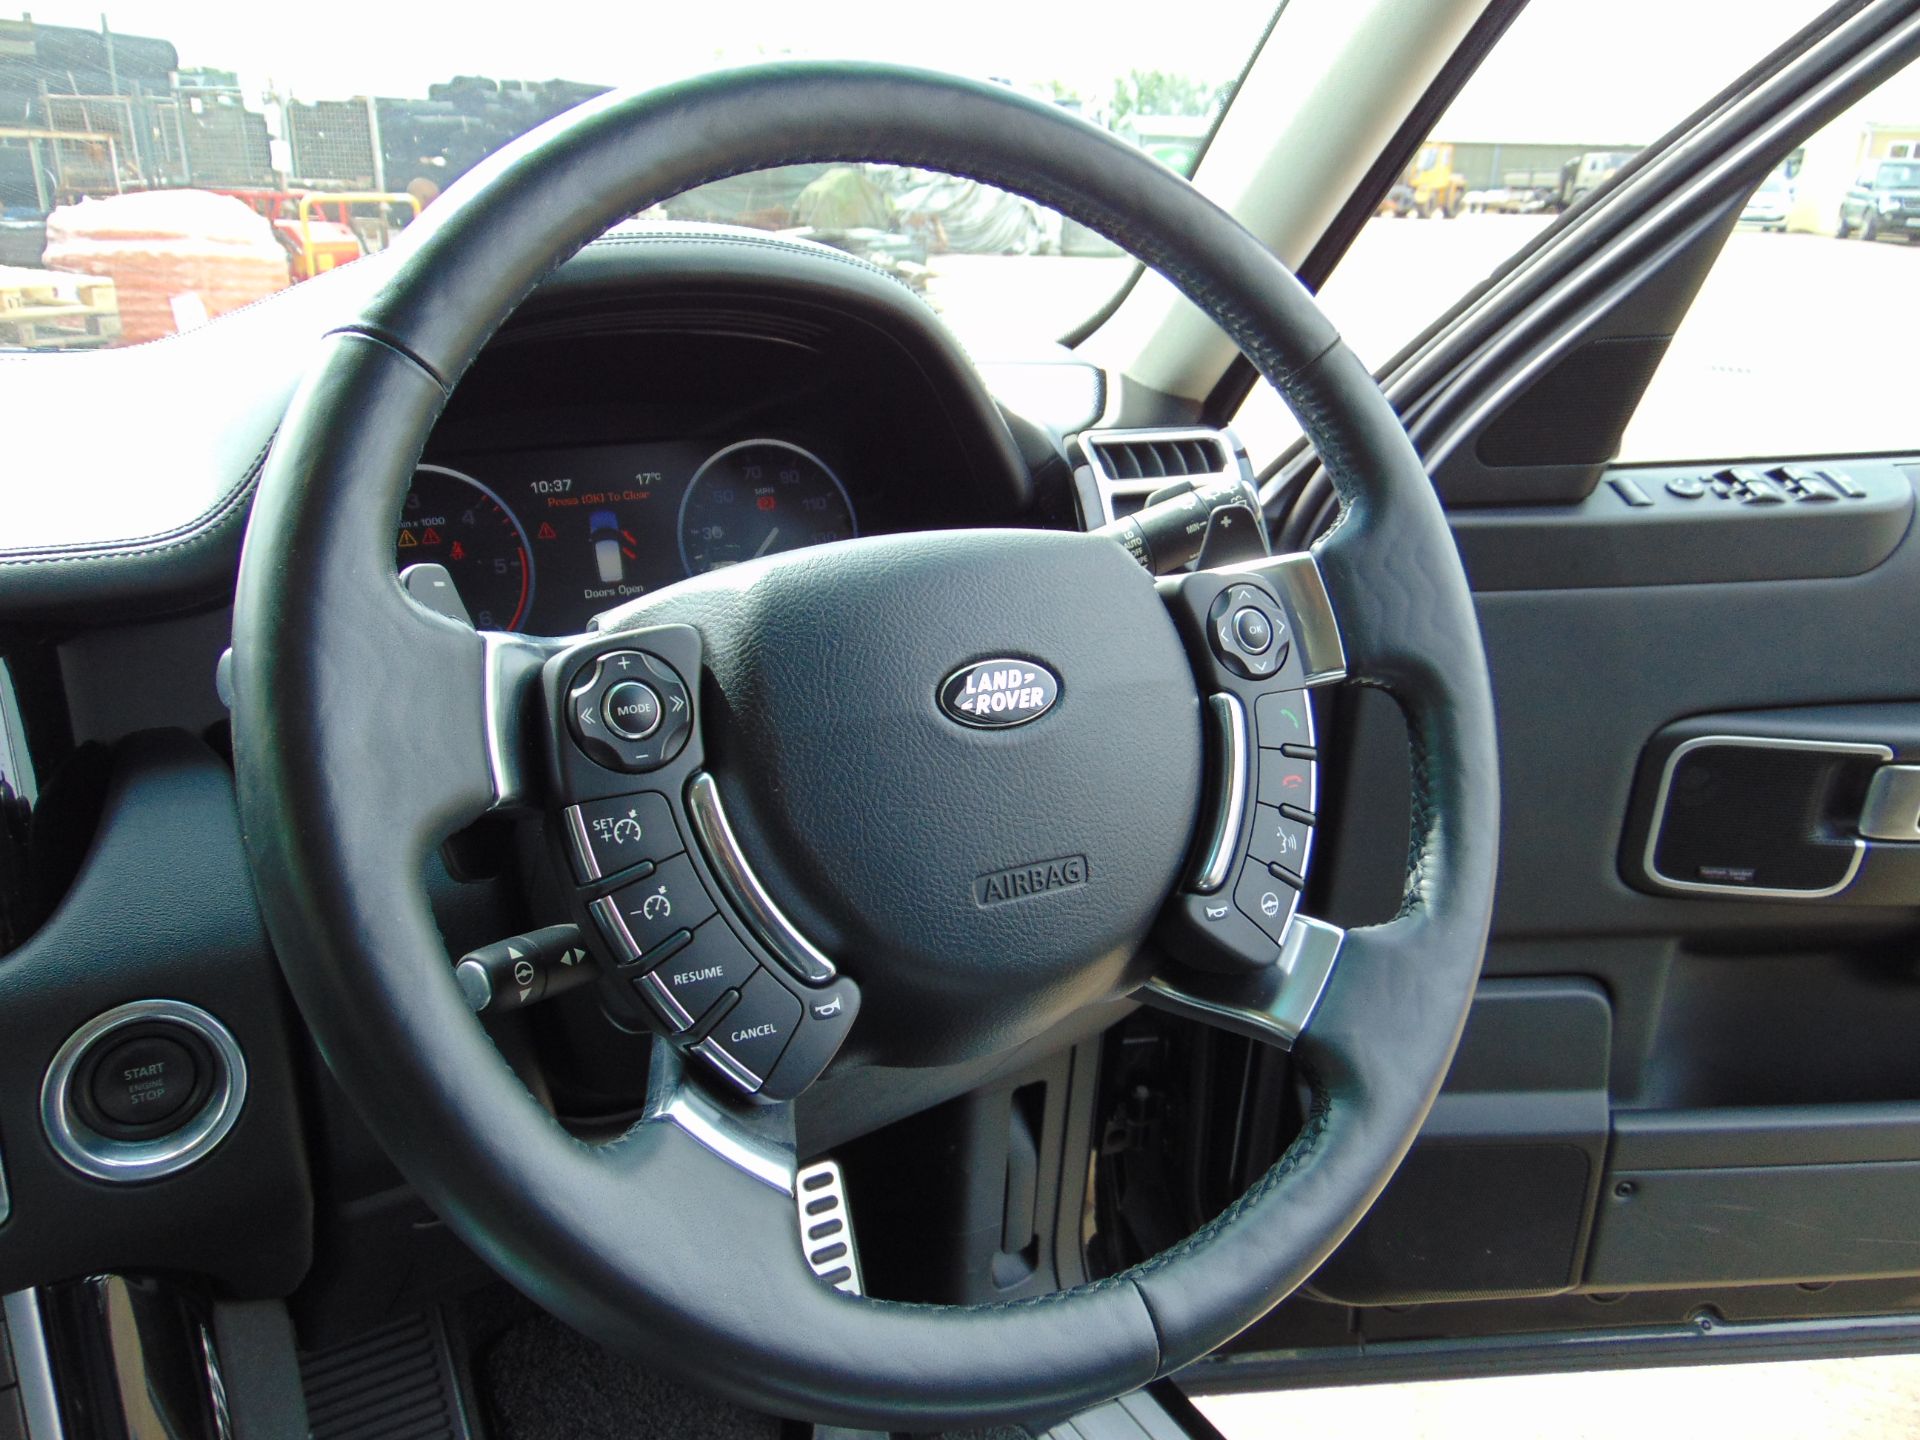 2012 1 Owner From New Range Rover 4.4 TD V8 Westminster Only 58,153 Miles! - Image 23 of 30